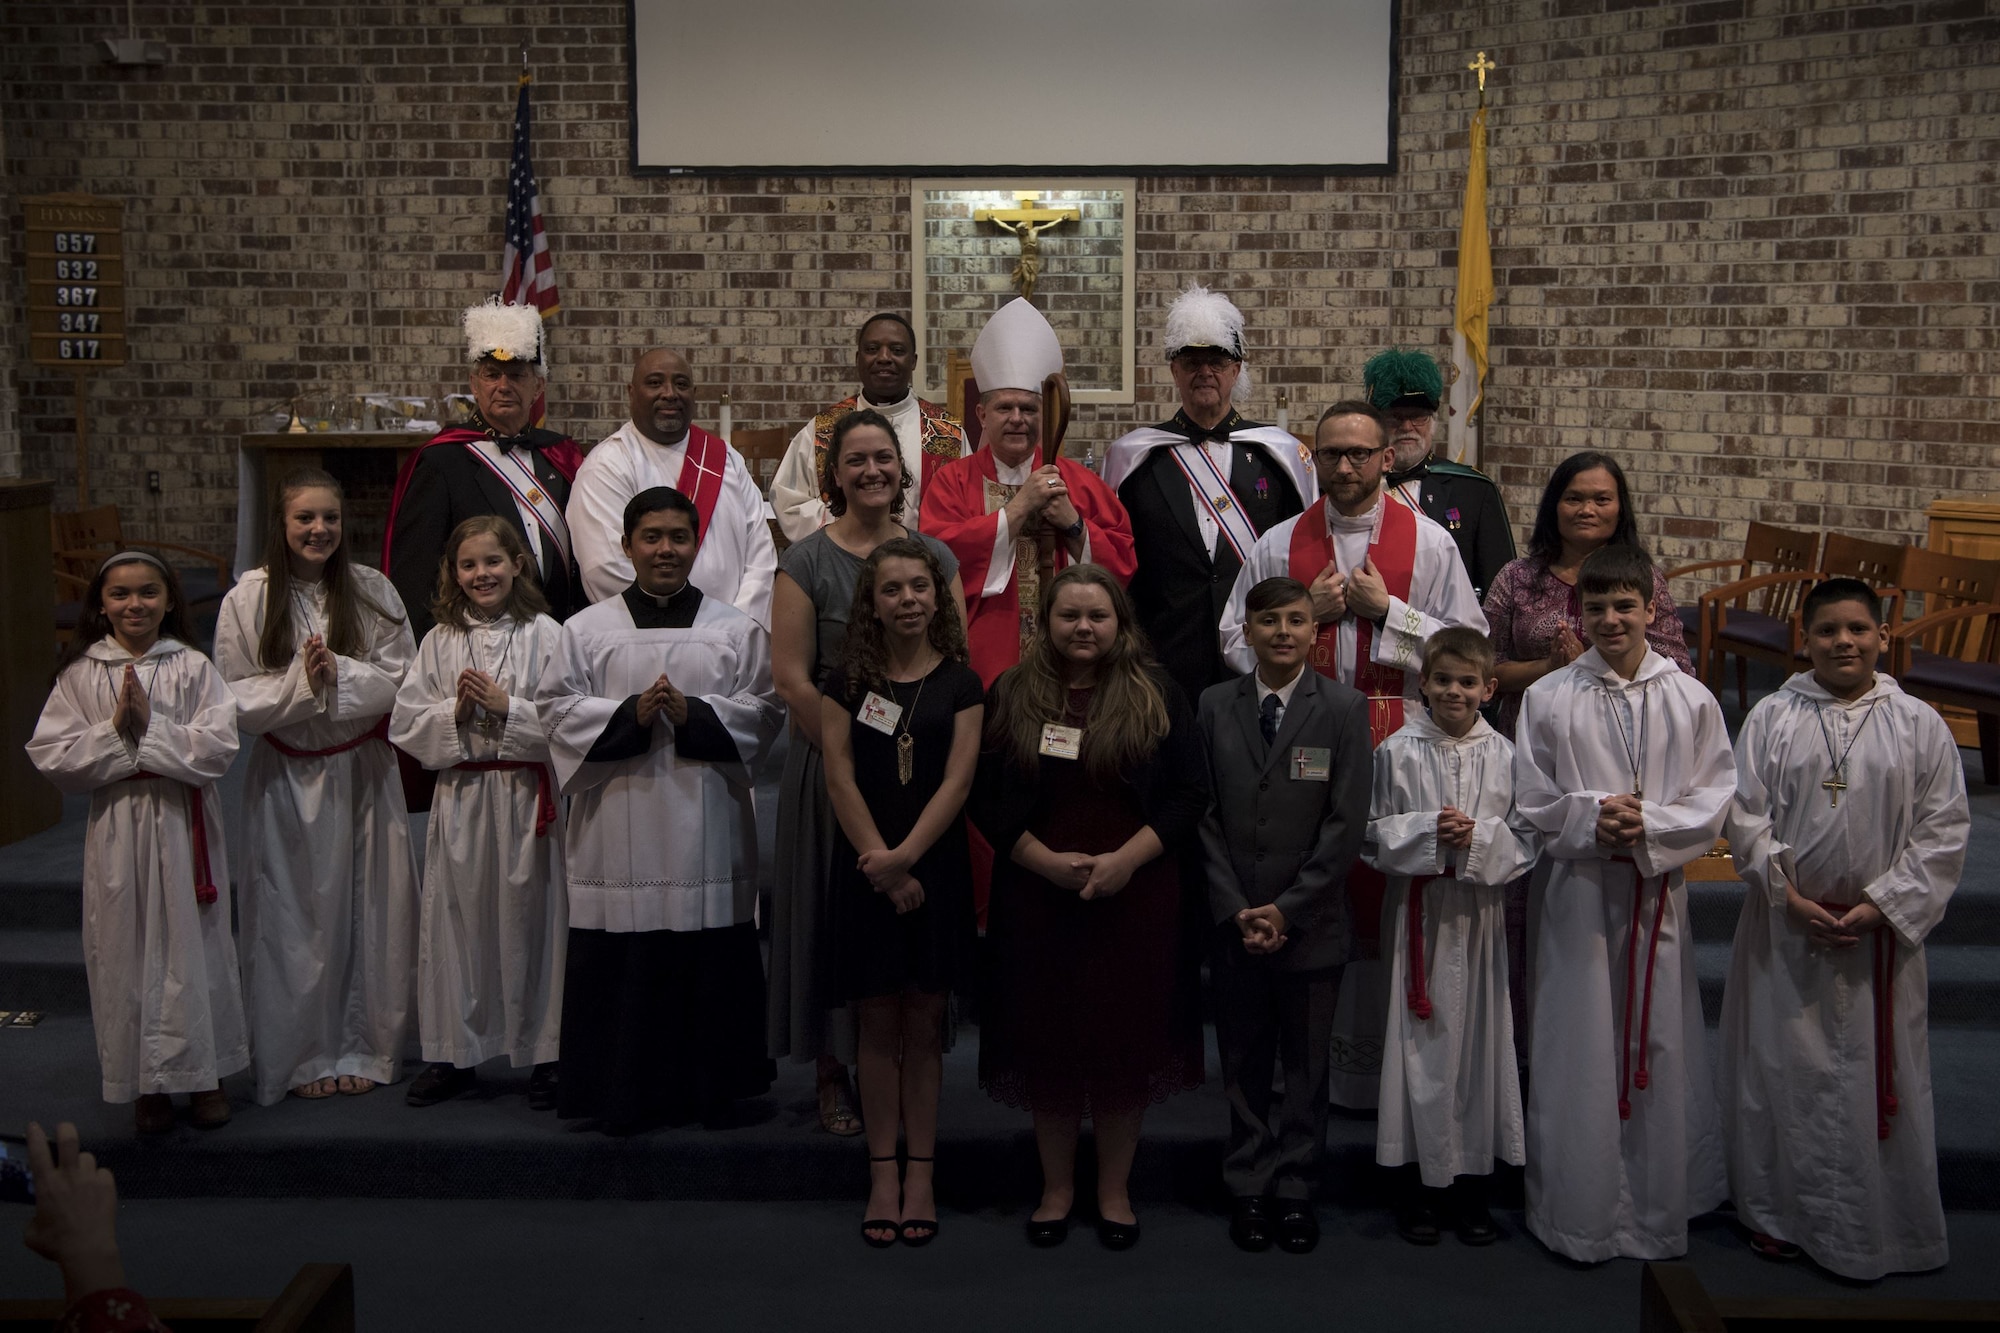 Members of  the Catholic community pose for a group photo with Bishop Robert J. Coyle, Archdiocese of the Military Services, after a Sacrament of Confirmation ceremony, Feb. 12, 2018, at Moody Air Force Base, Ga.